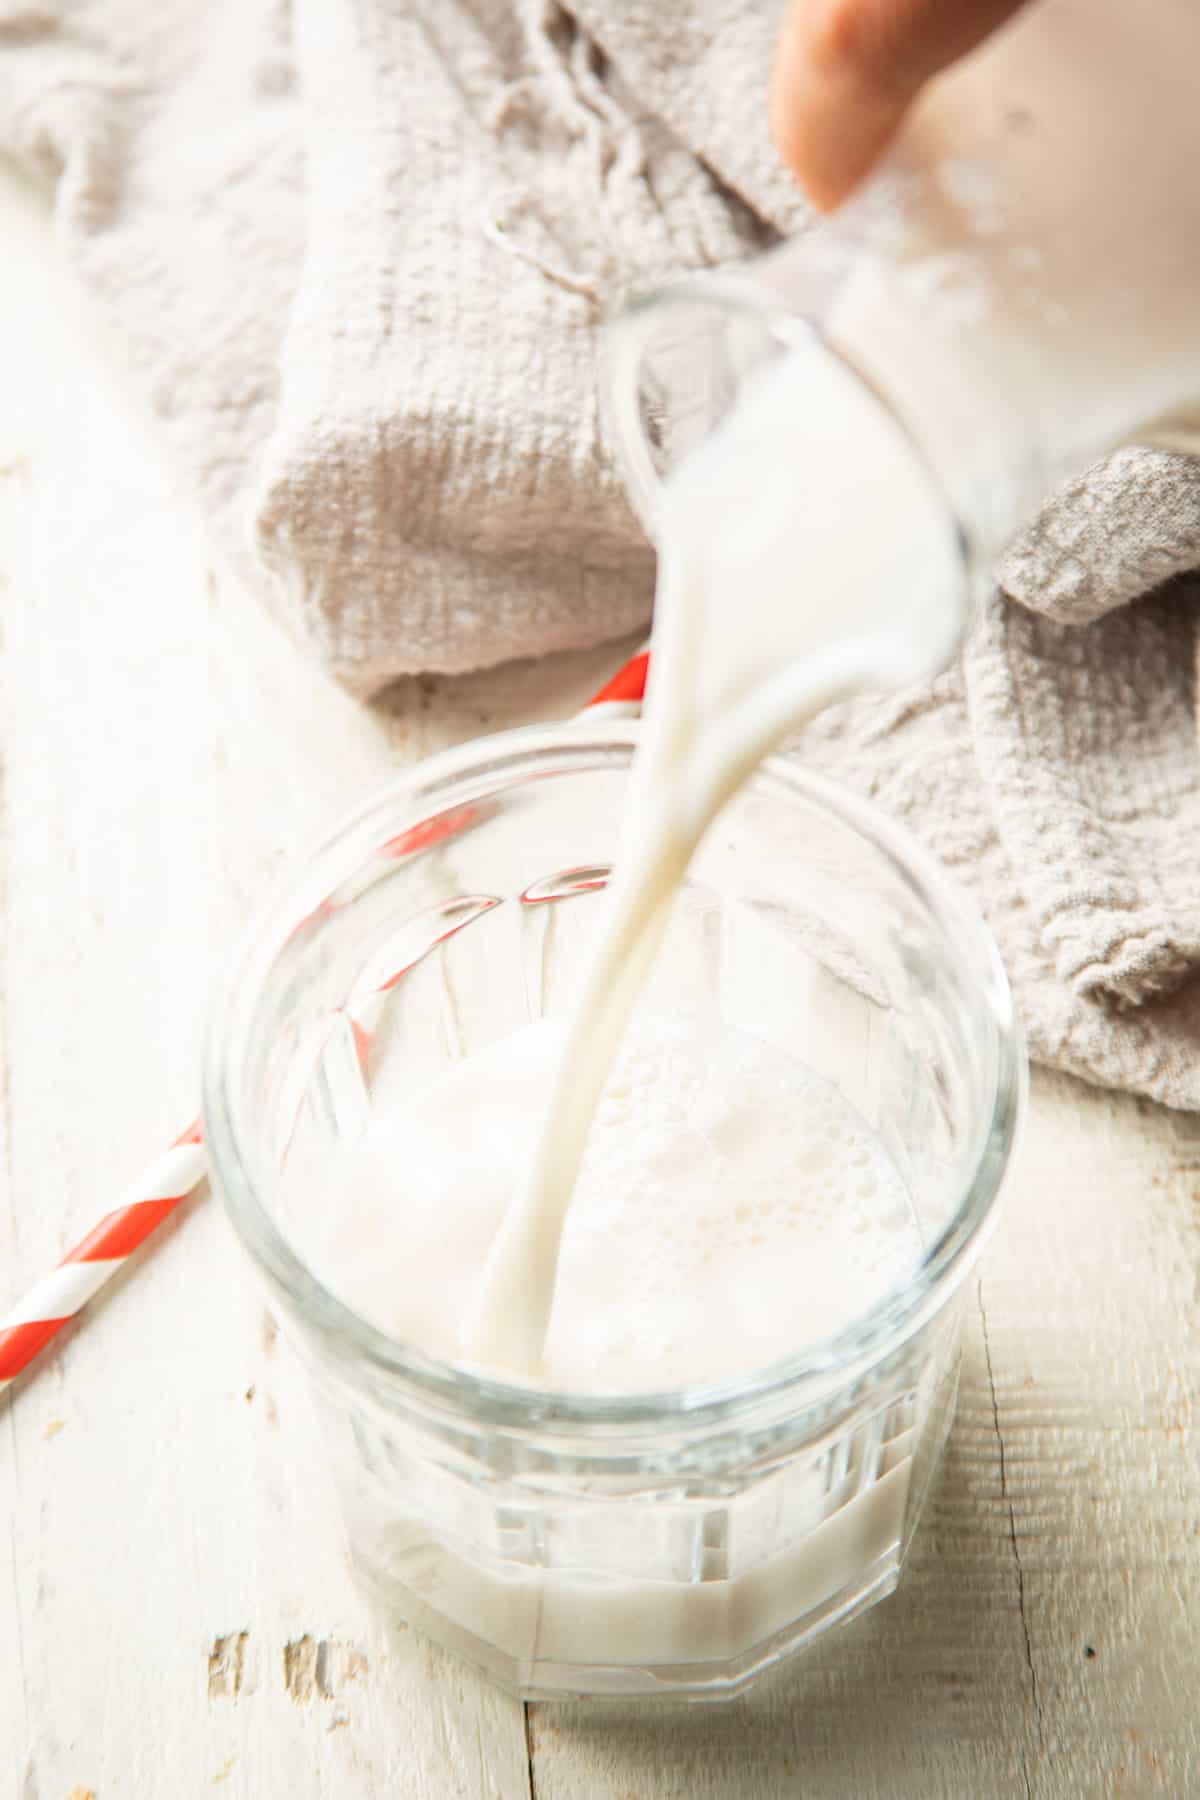 Plant based milk being poured from a jug into a glass.